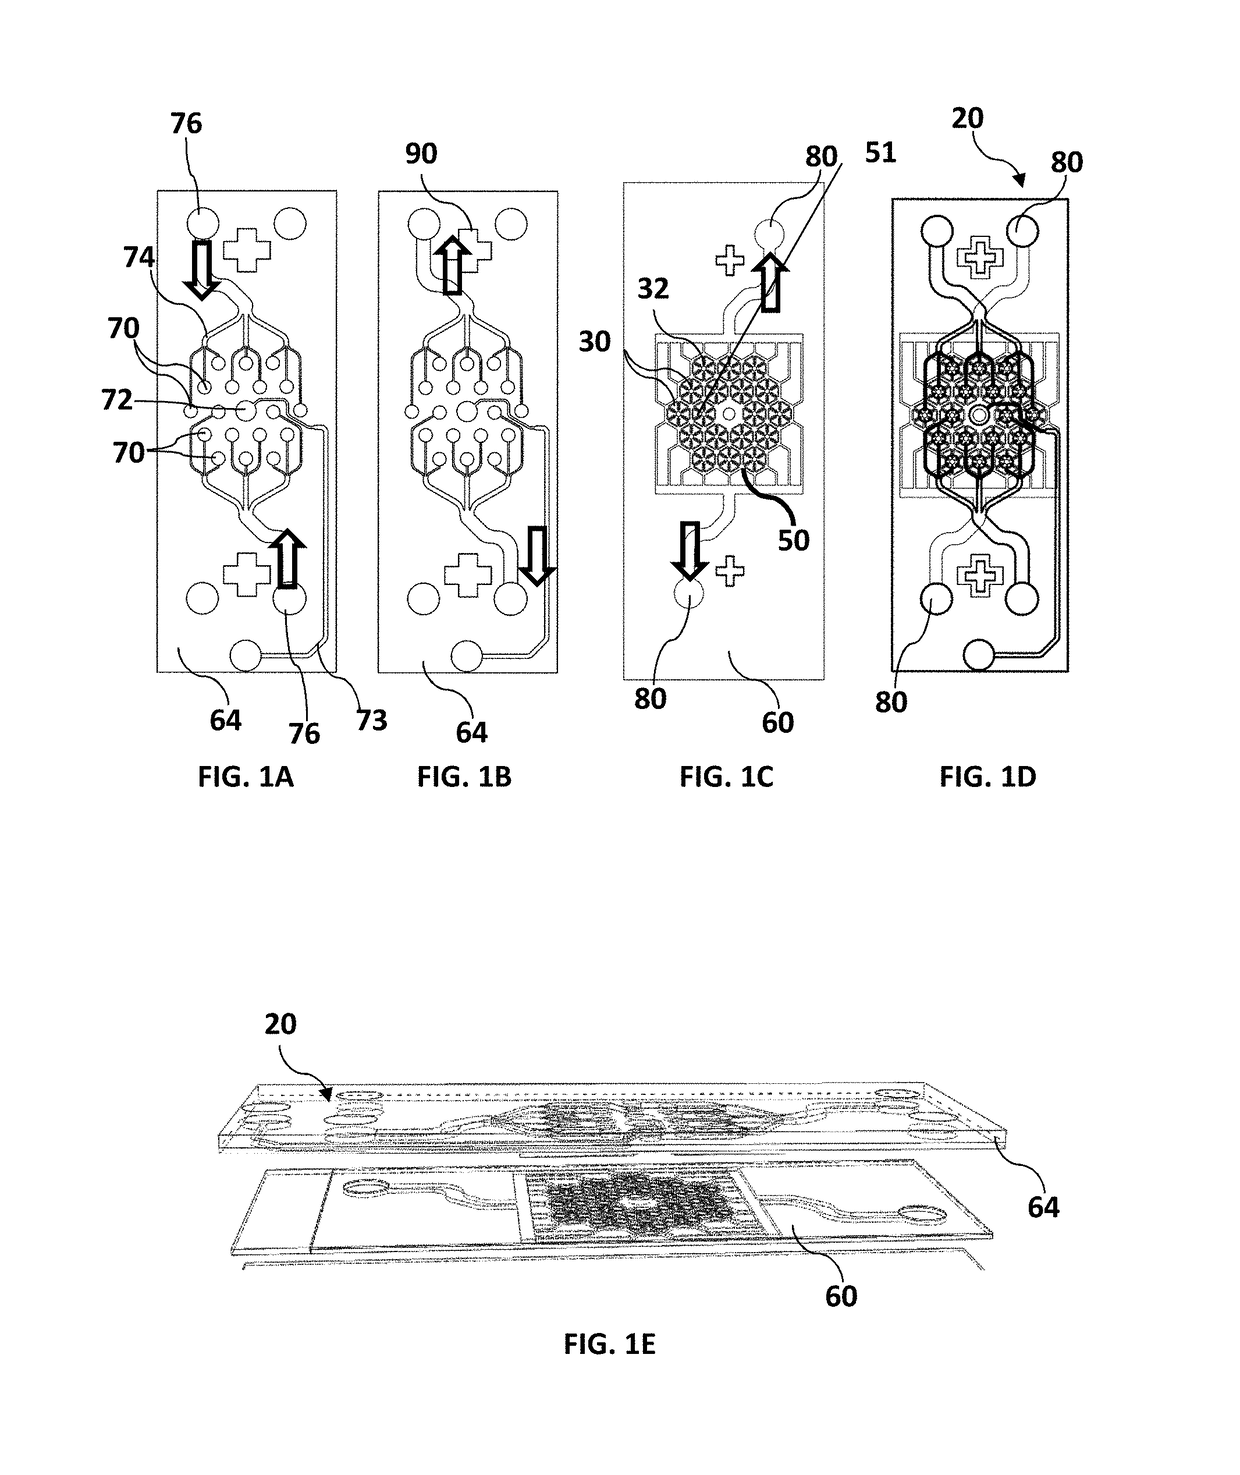 Microfluidic device for culturing cells